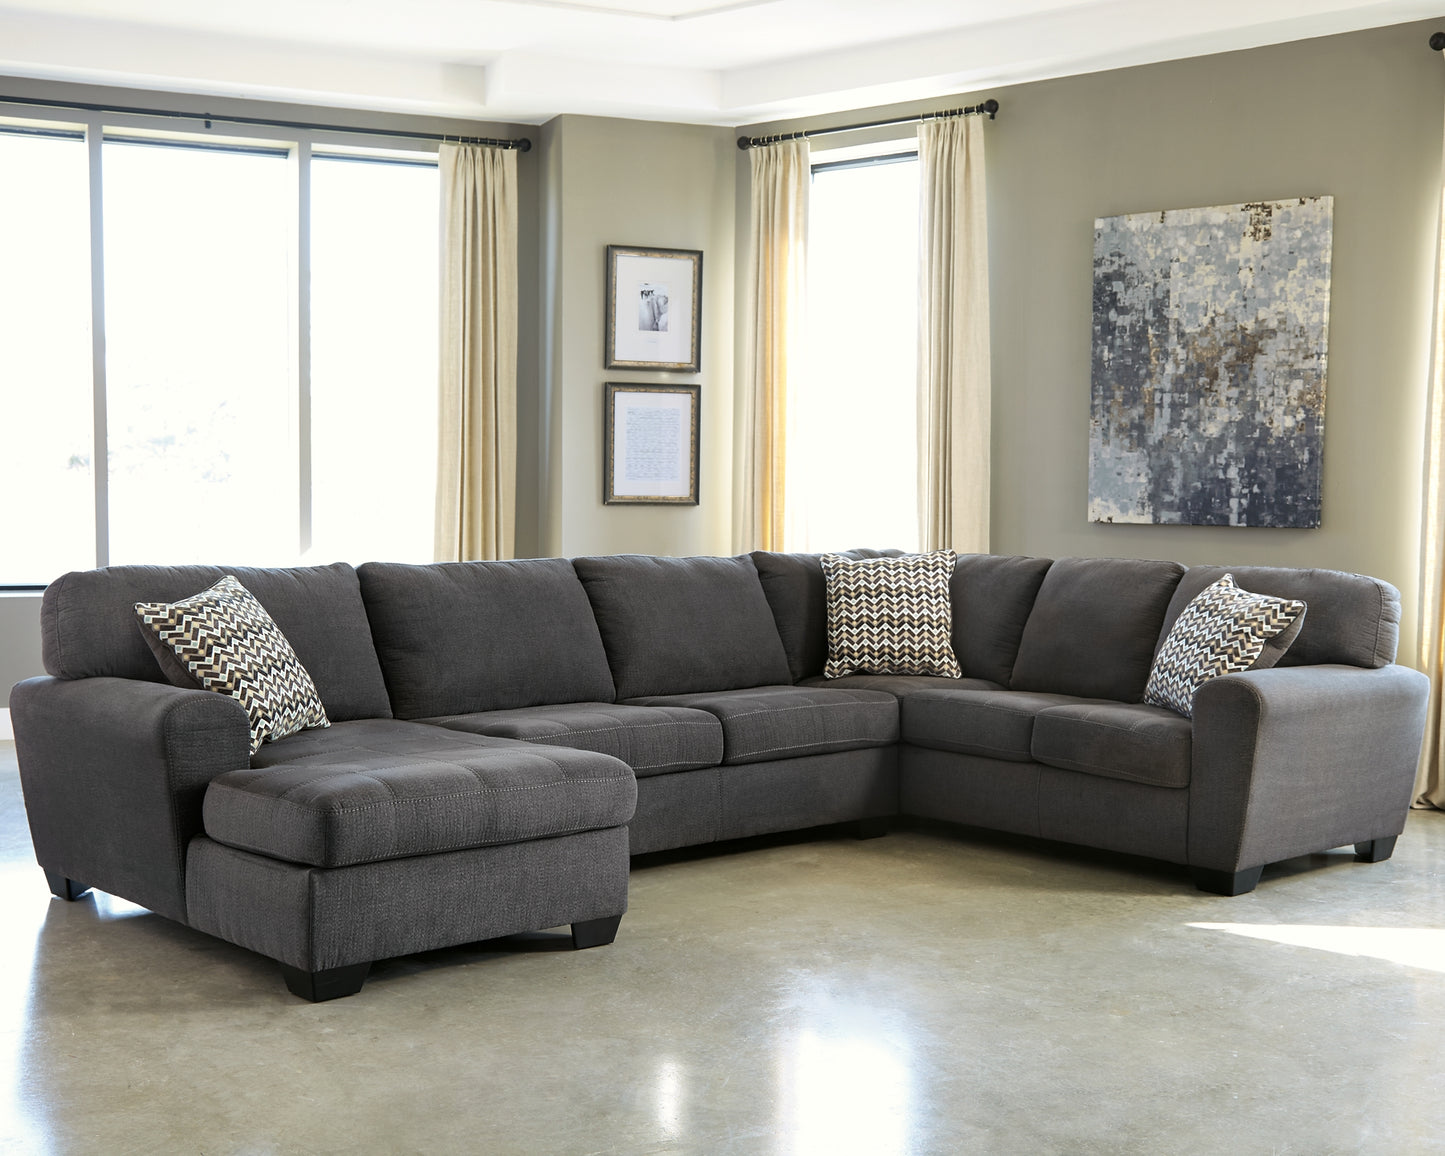 Ambee 3-Piece Sectional with Chaise Wilson Furniture (OH)  in Bridgeport, Ohio. Serving Bridgeport, Yorkville, Bellaire, & Avondale